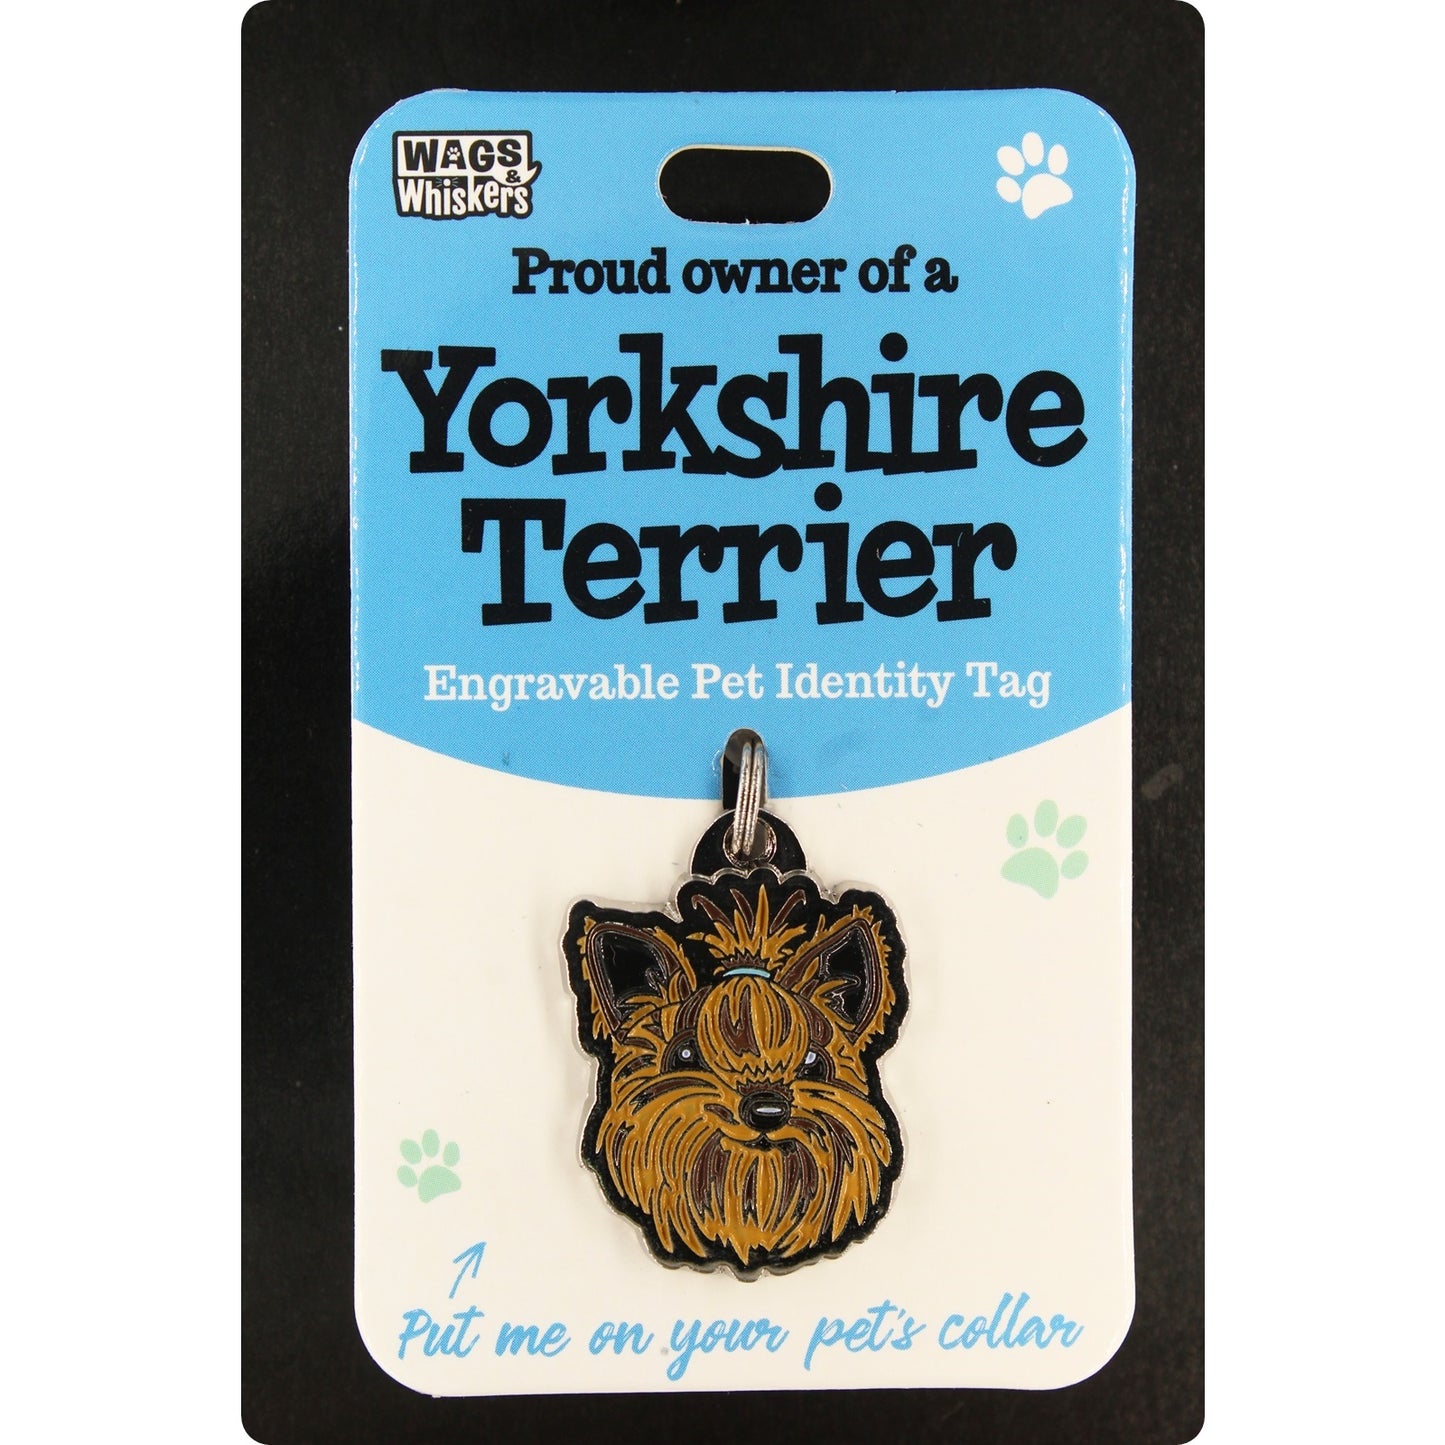 Wags & Whiskers Pet Identity Tag - Yorkshire Terrier 00204090070